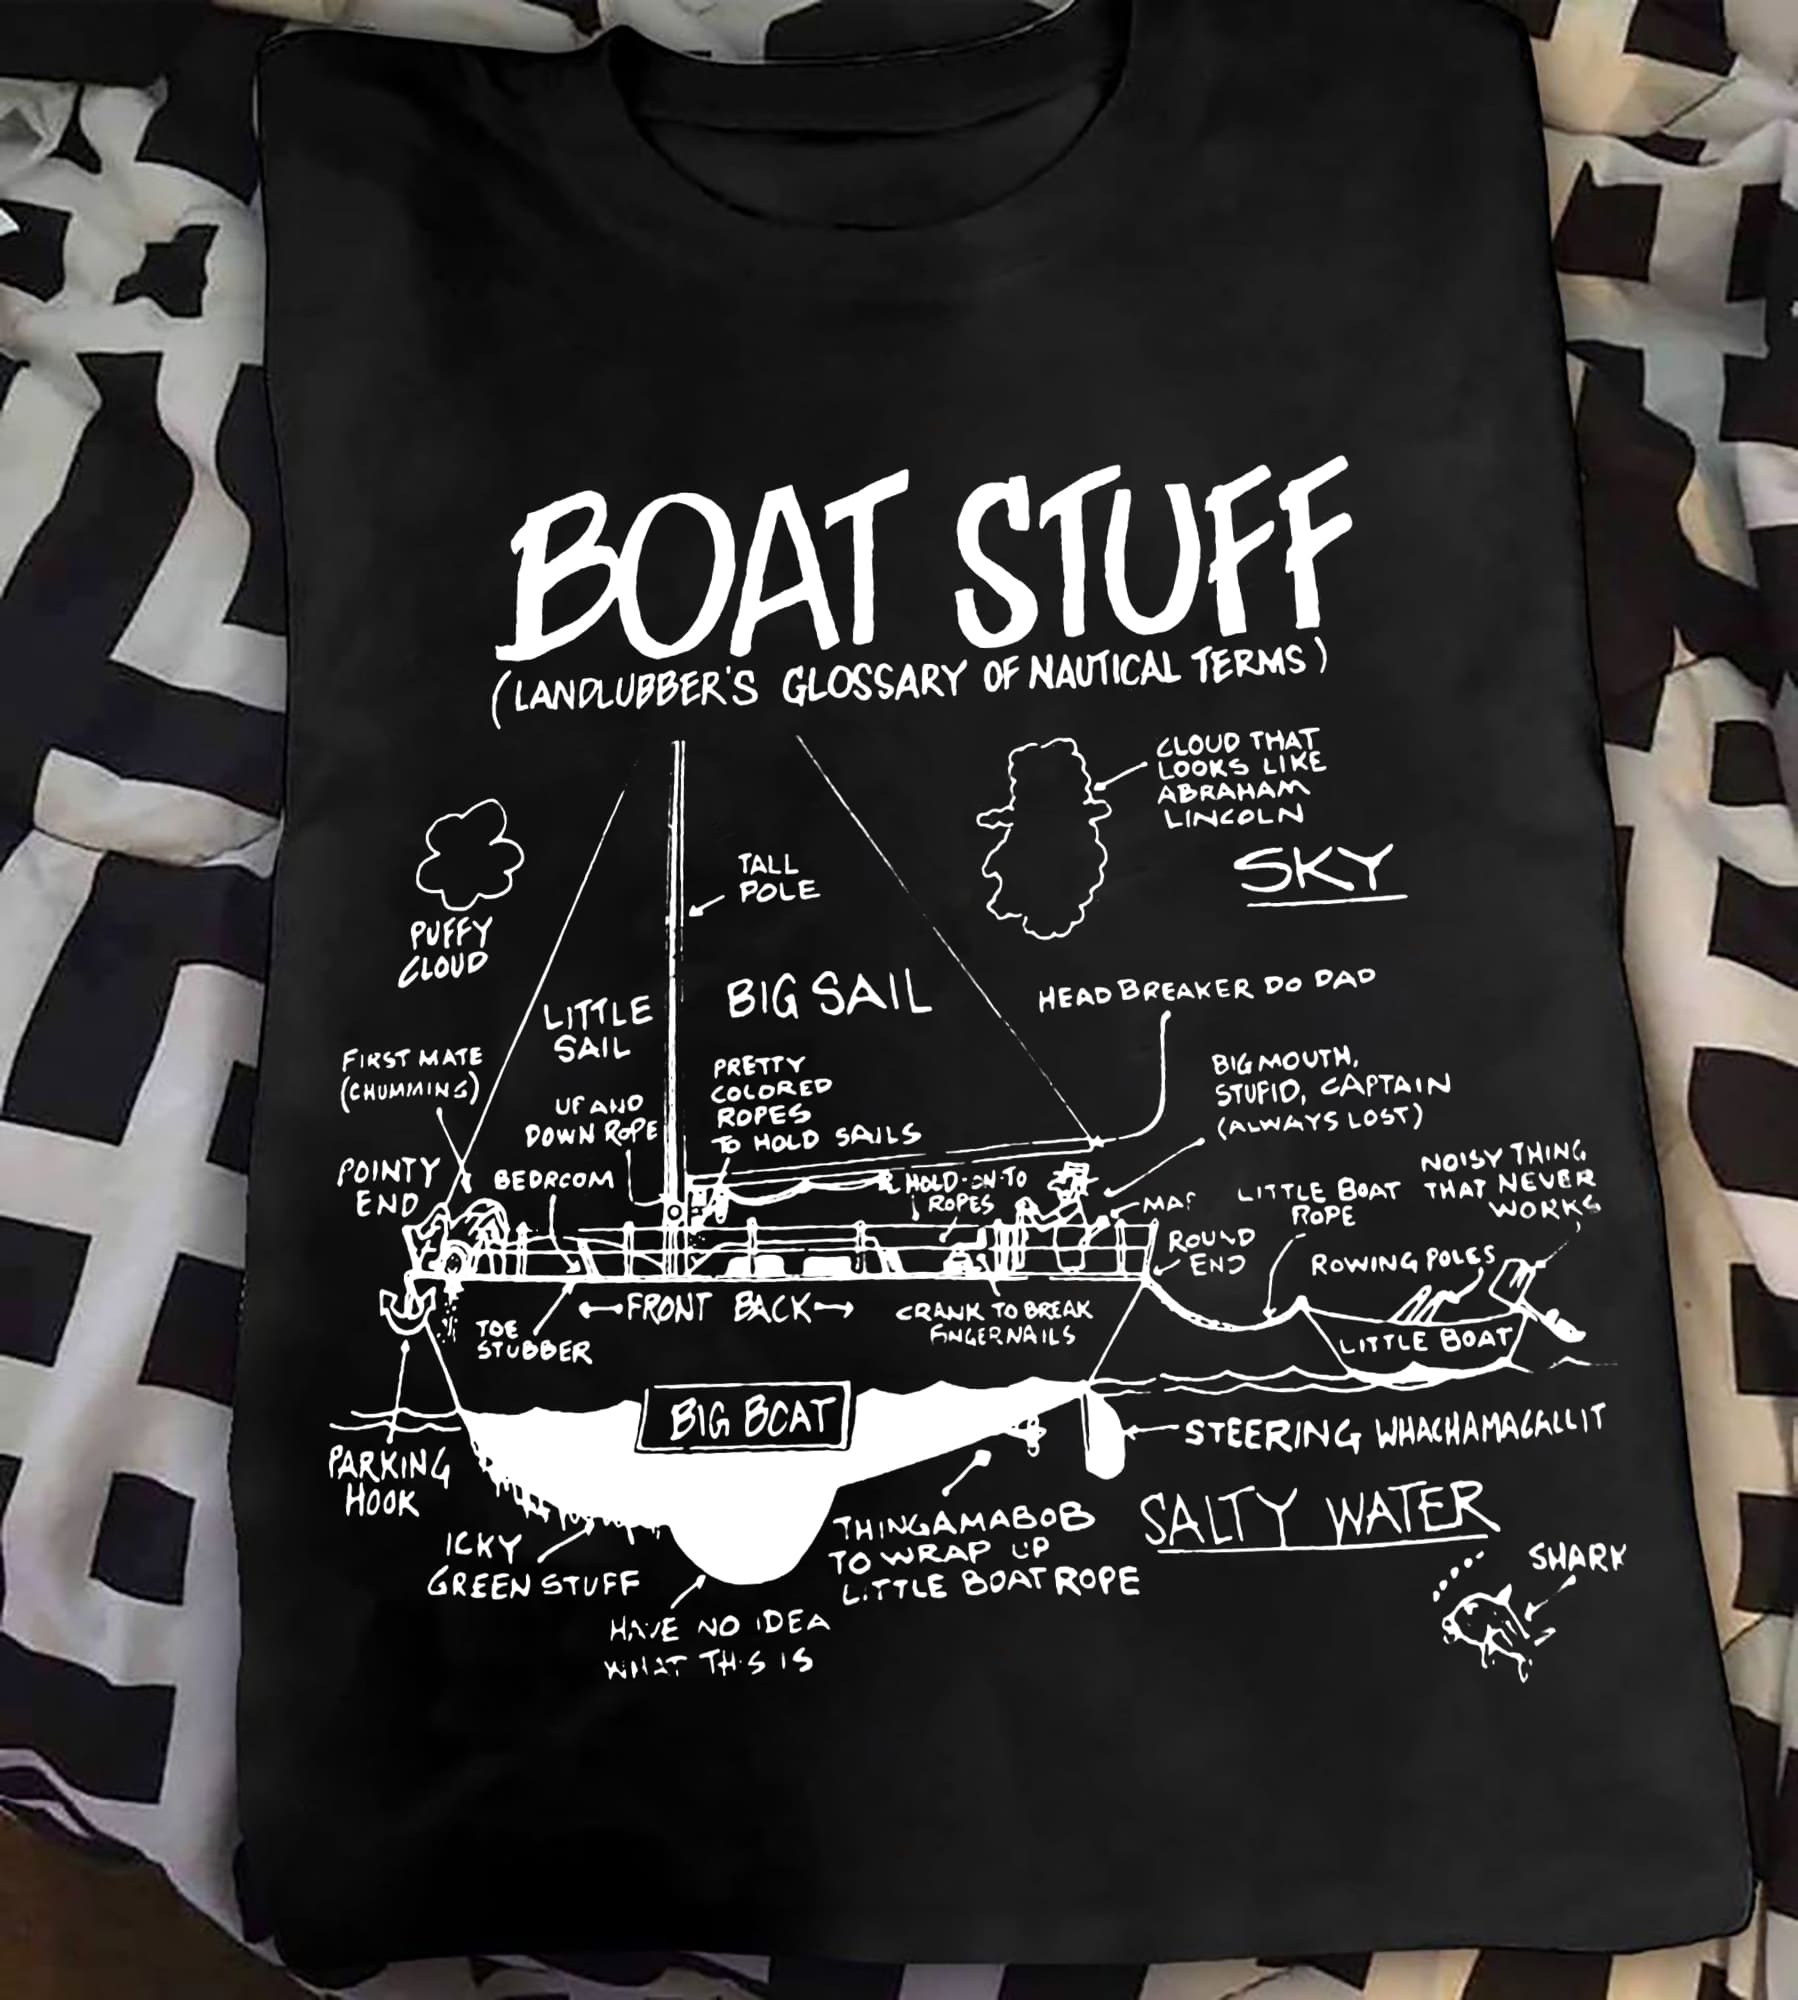 Boat stuff - Landlubber's glossary of nautical terms, puffy cloud, little sail This T-Shirt, Hoodie, Sweatshirt, Ladies T-Shirt, Youth T-shirt is for lovers like Boat stuff, Landlubber's glossary of nautical terms, puffy cloud, little sail  Shirt are much suitable for those who Love Hobbies, Holidays, Pets, Movies, Out Door, Sport.